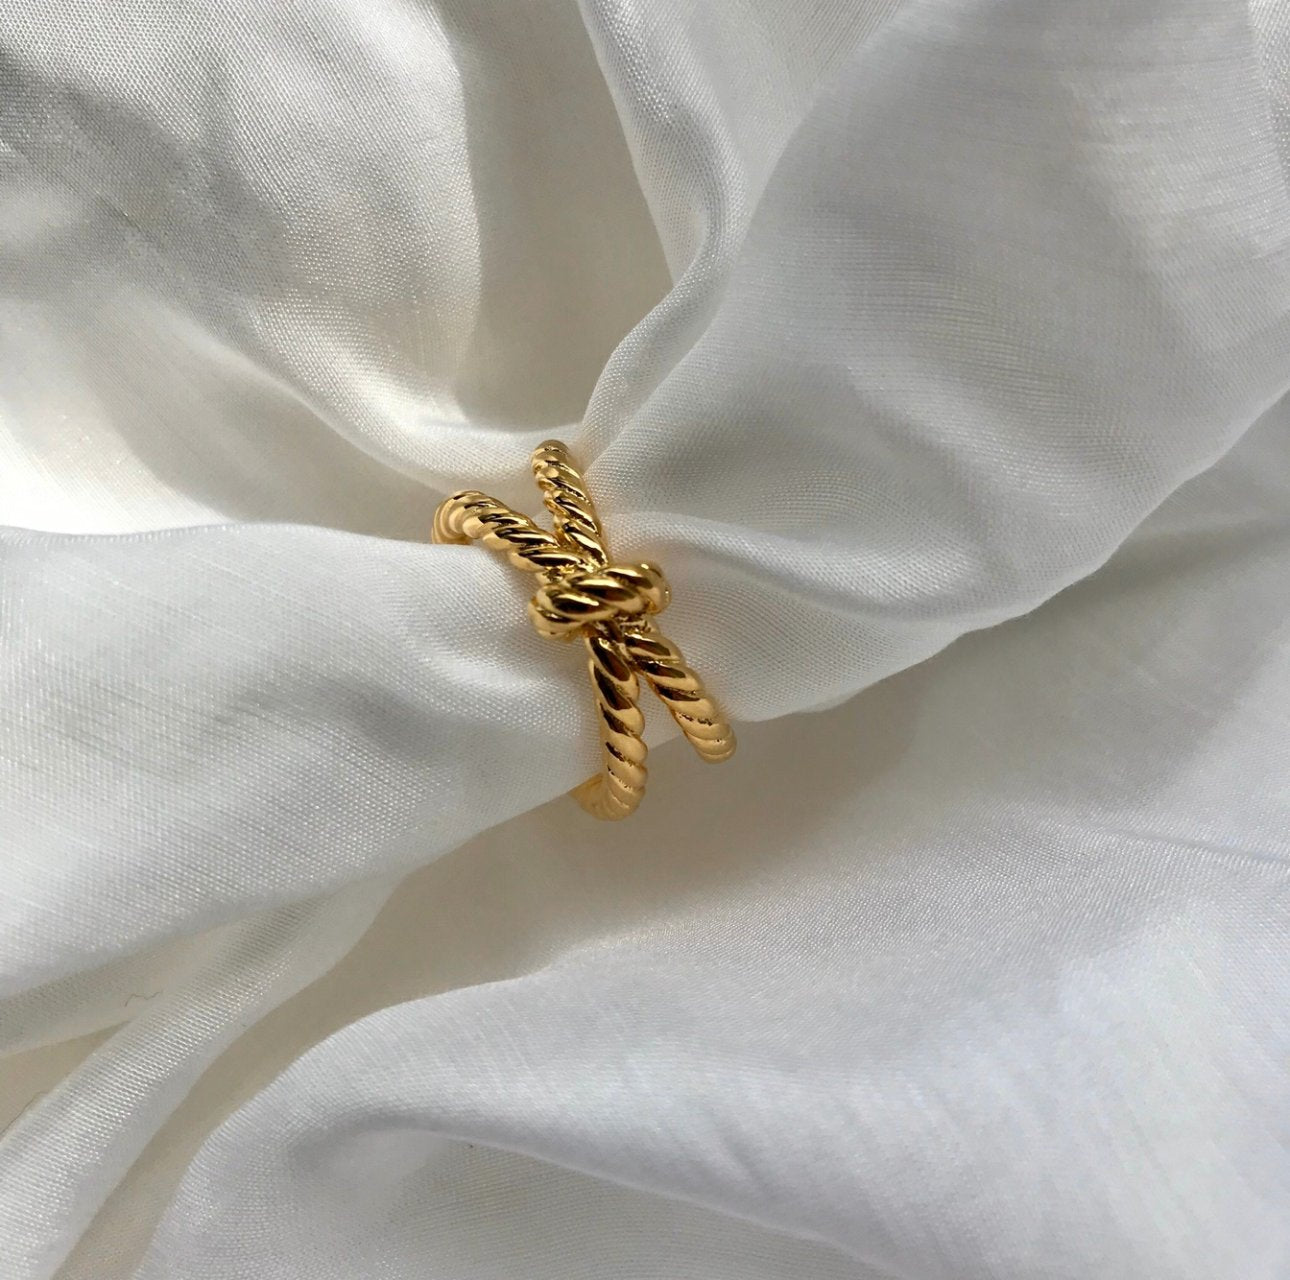 Charlotte Knot Ring in Gold